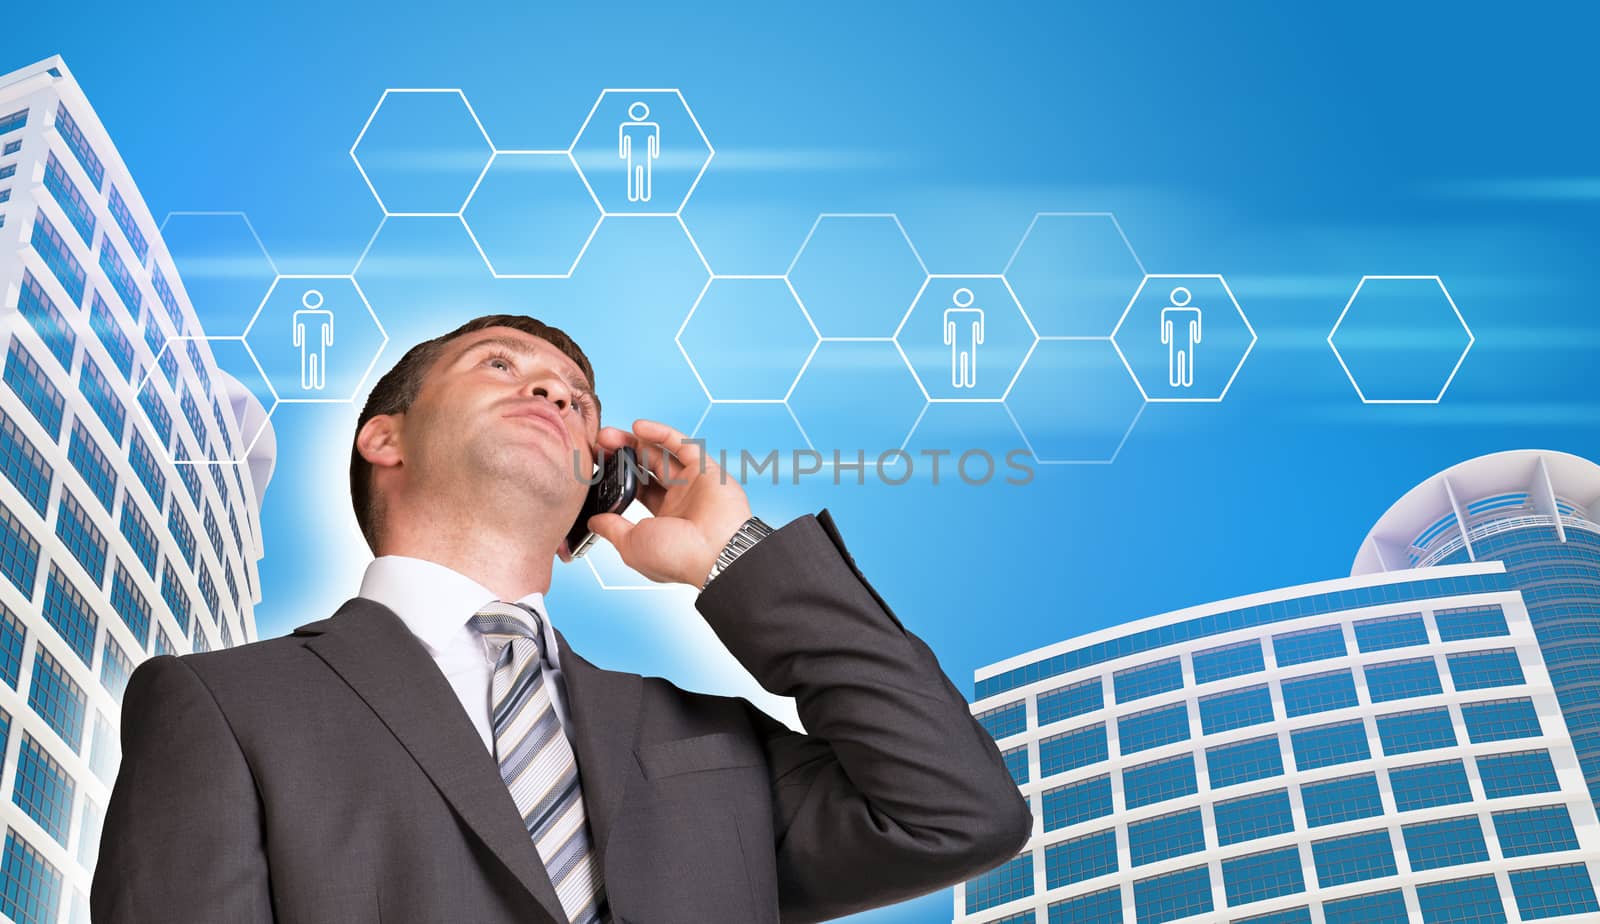 Businessman talking on the phone. Skyscrapers and hexagons with people icons by cherezoff